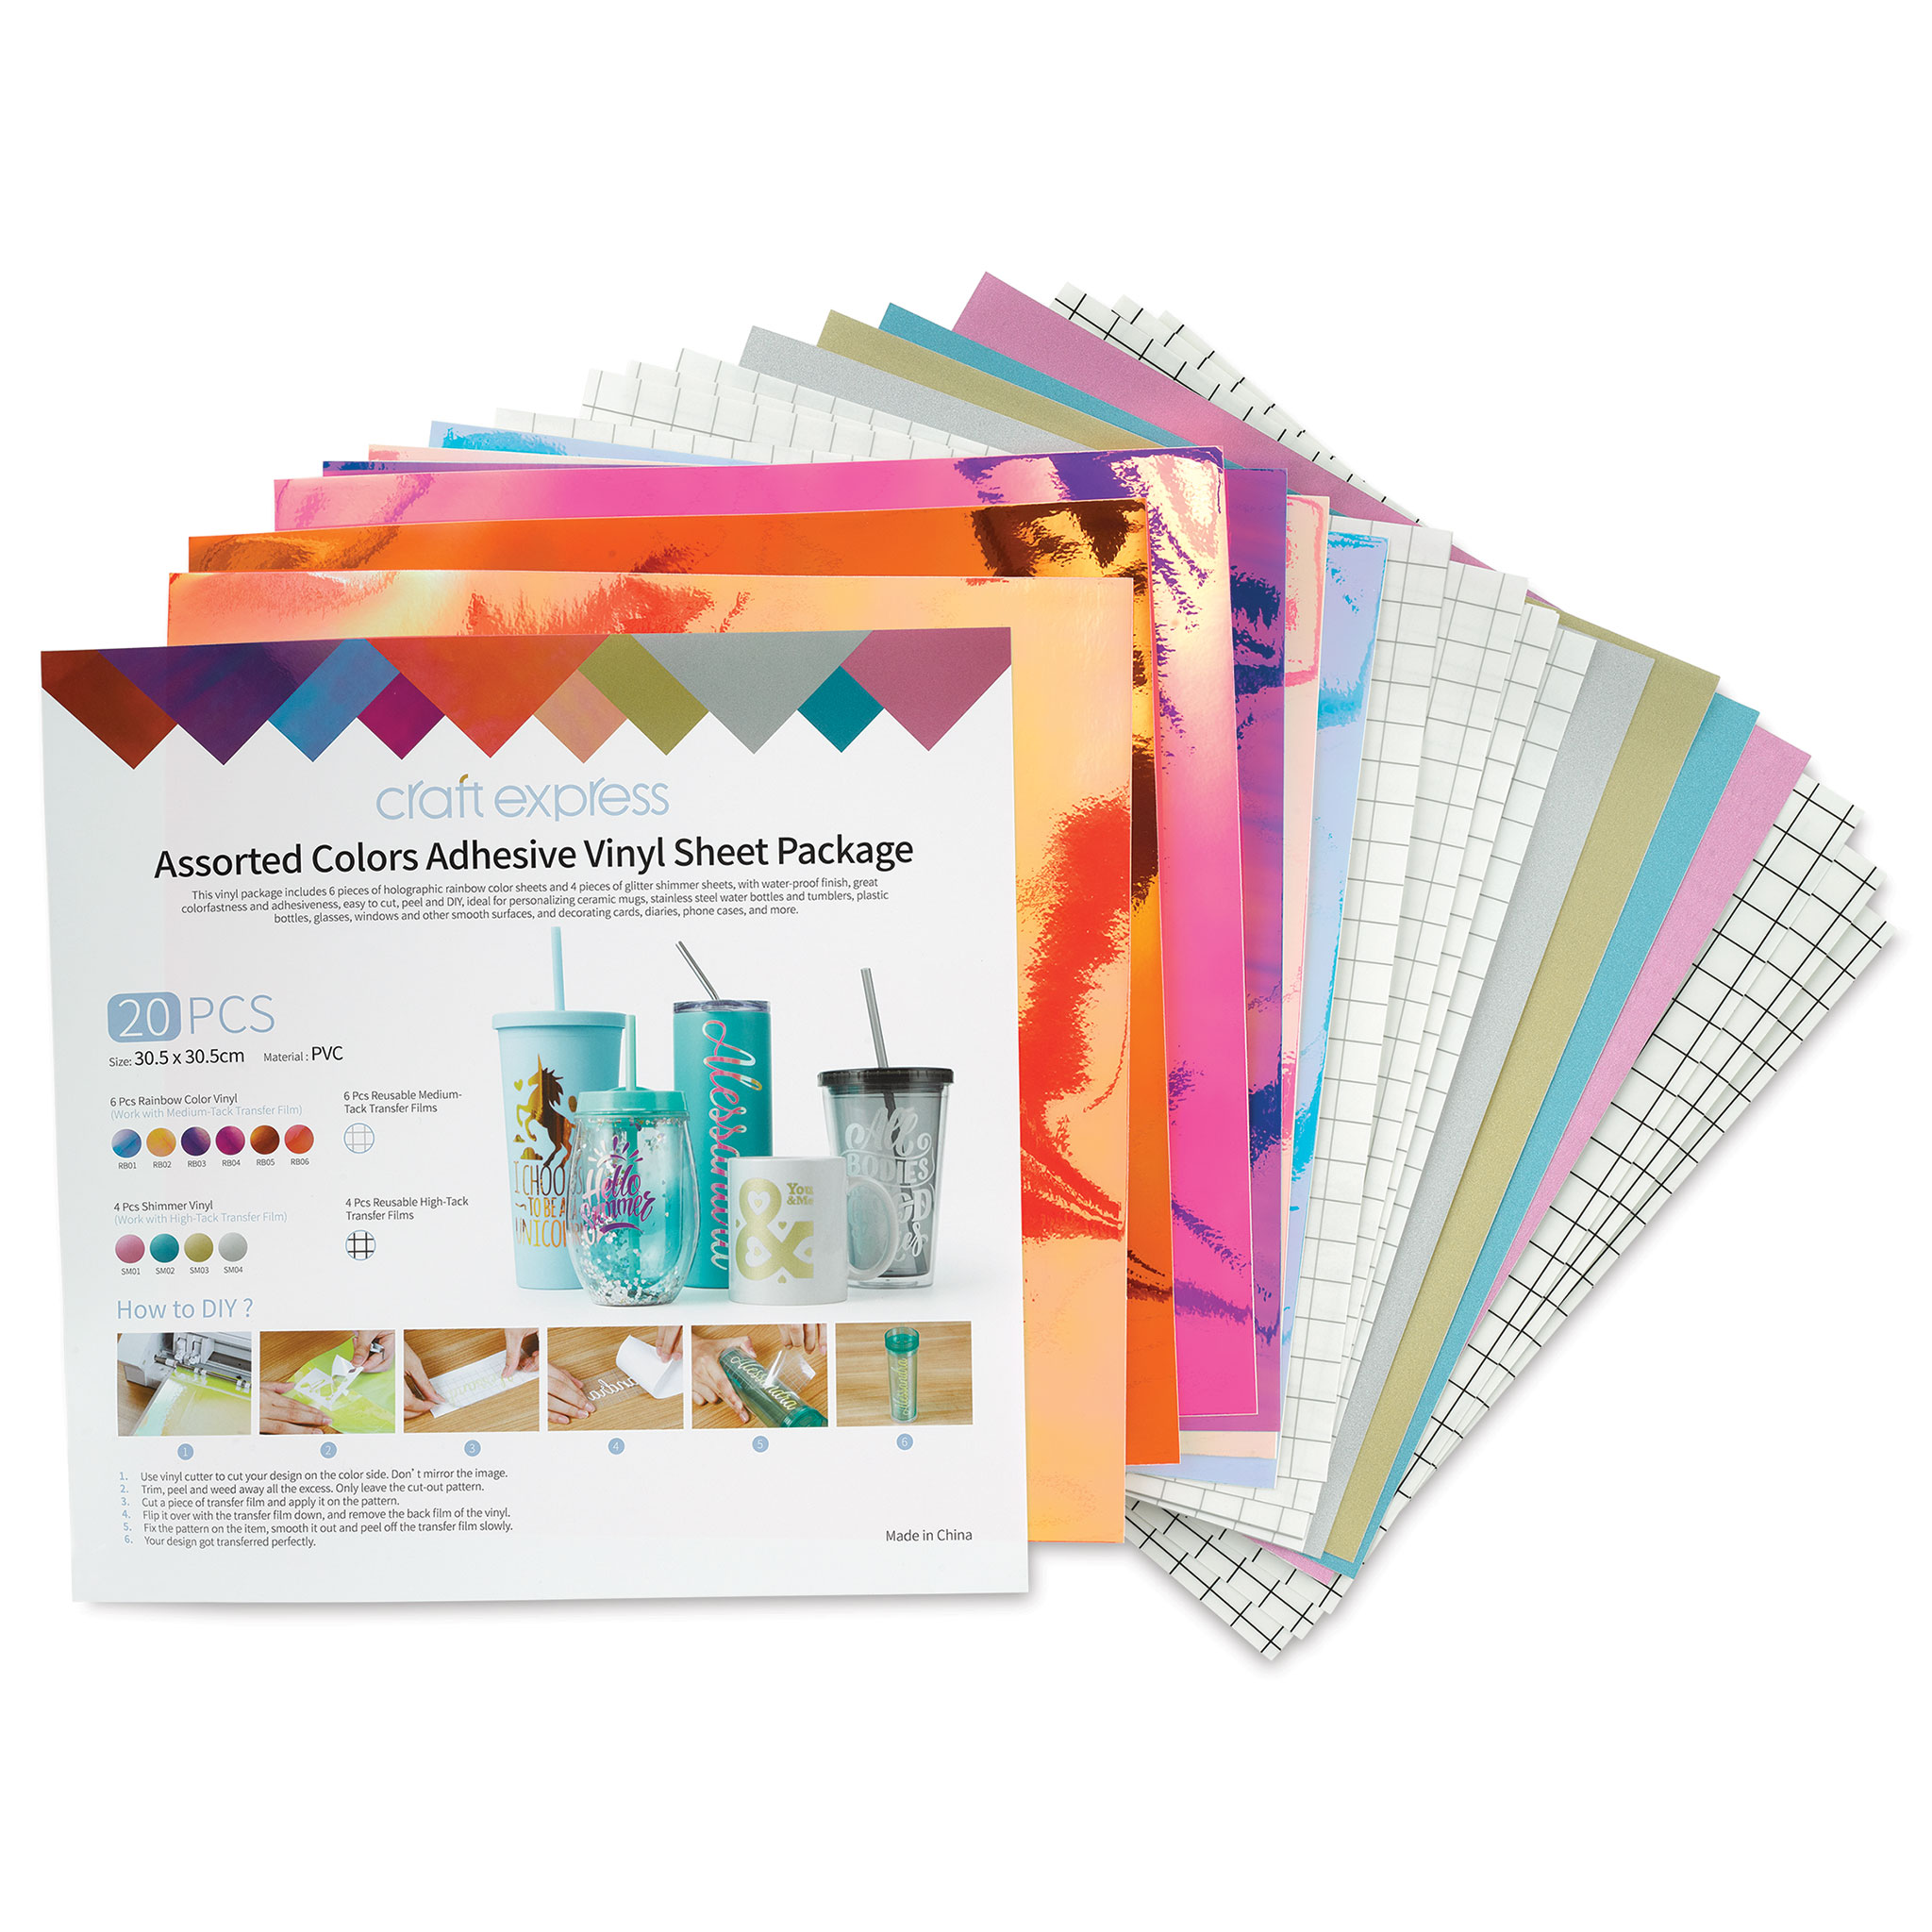 Craft Express Assorted 8-pack Color-Changing Vinyl Sheets